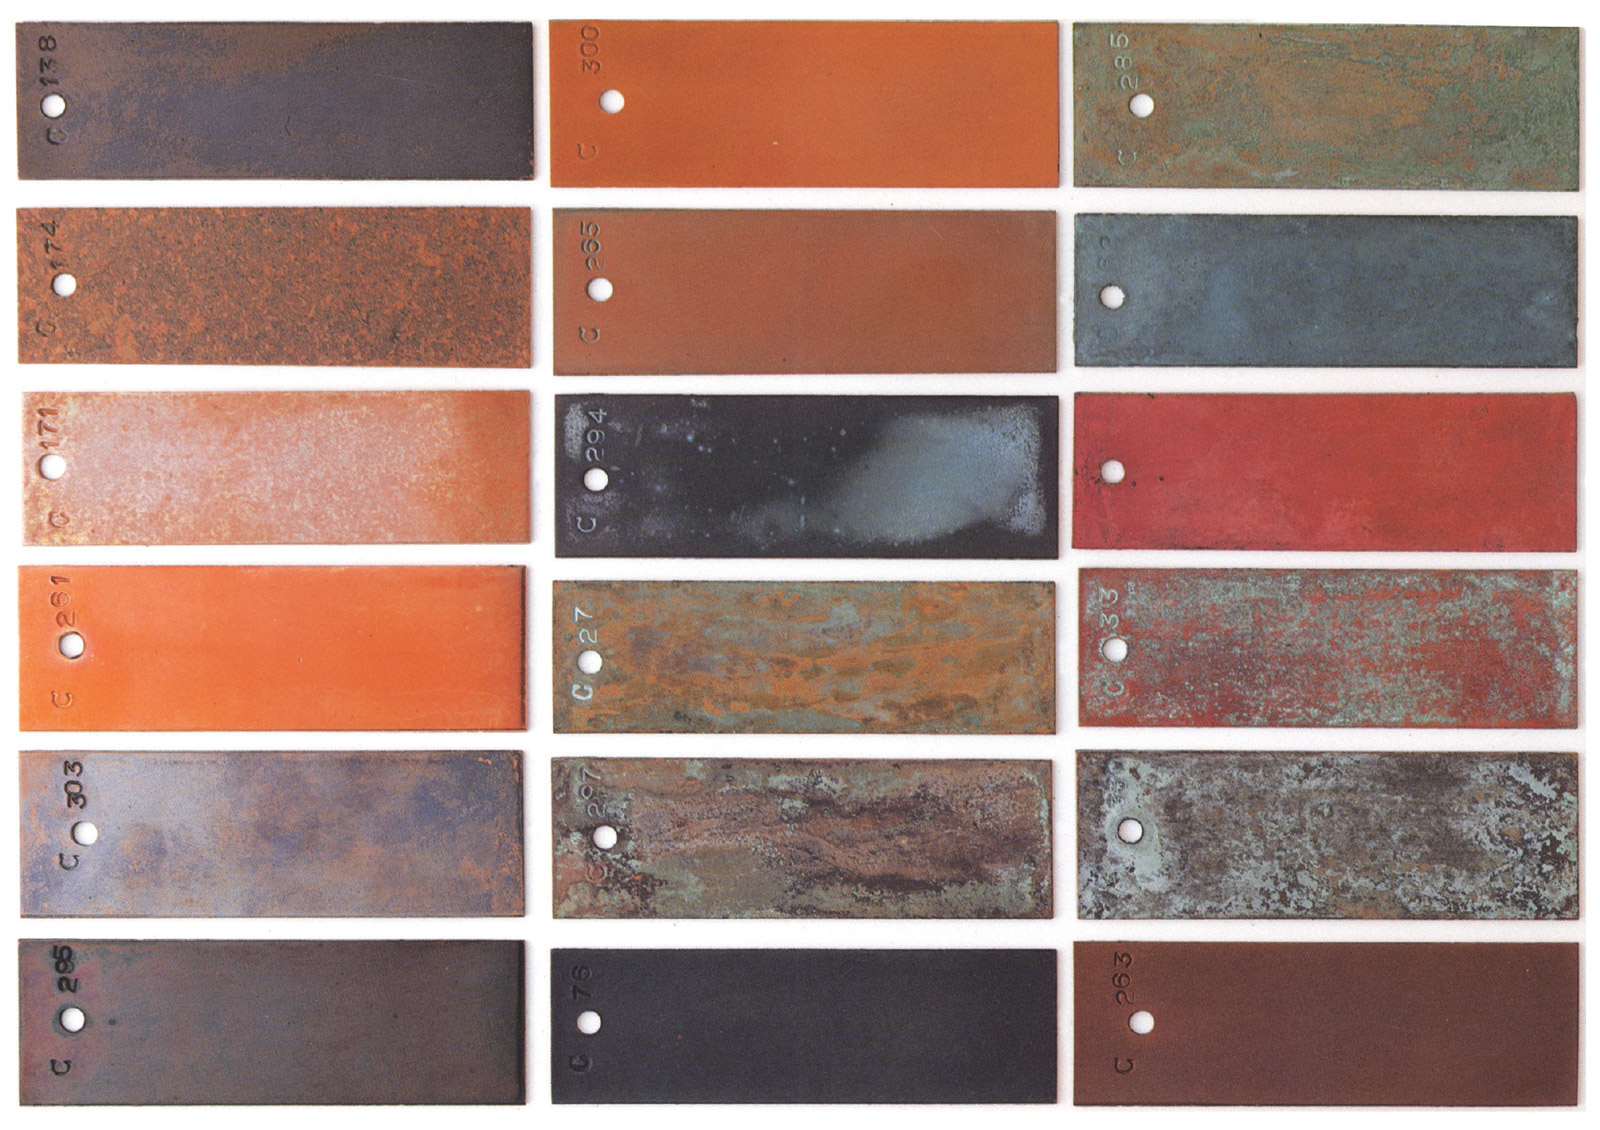 A postcard depicting 18 color swatches of various copper patinas.